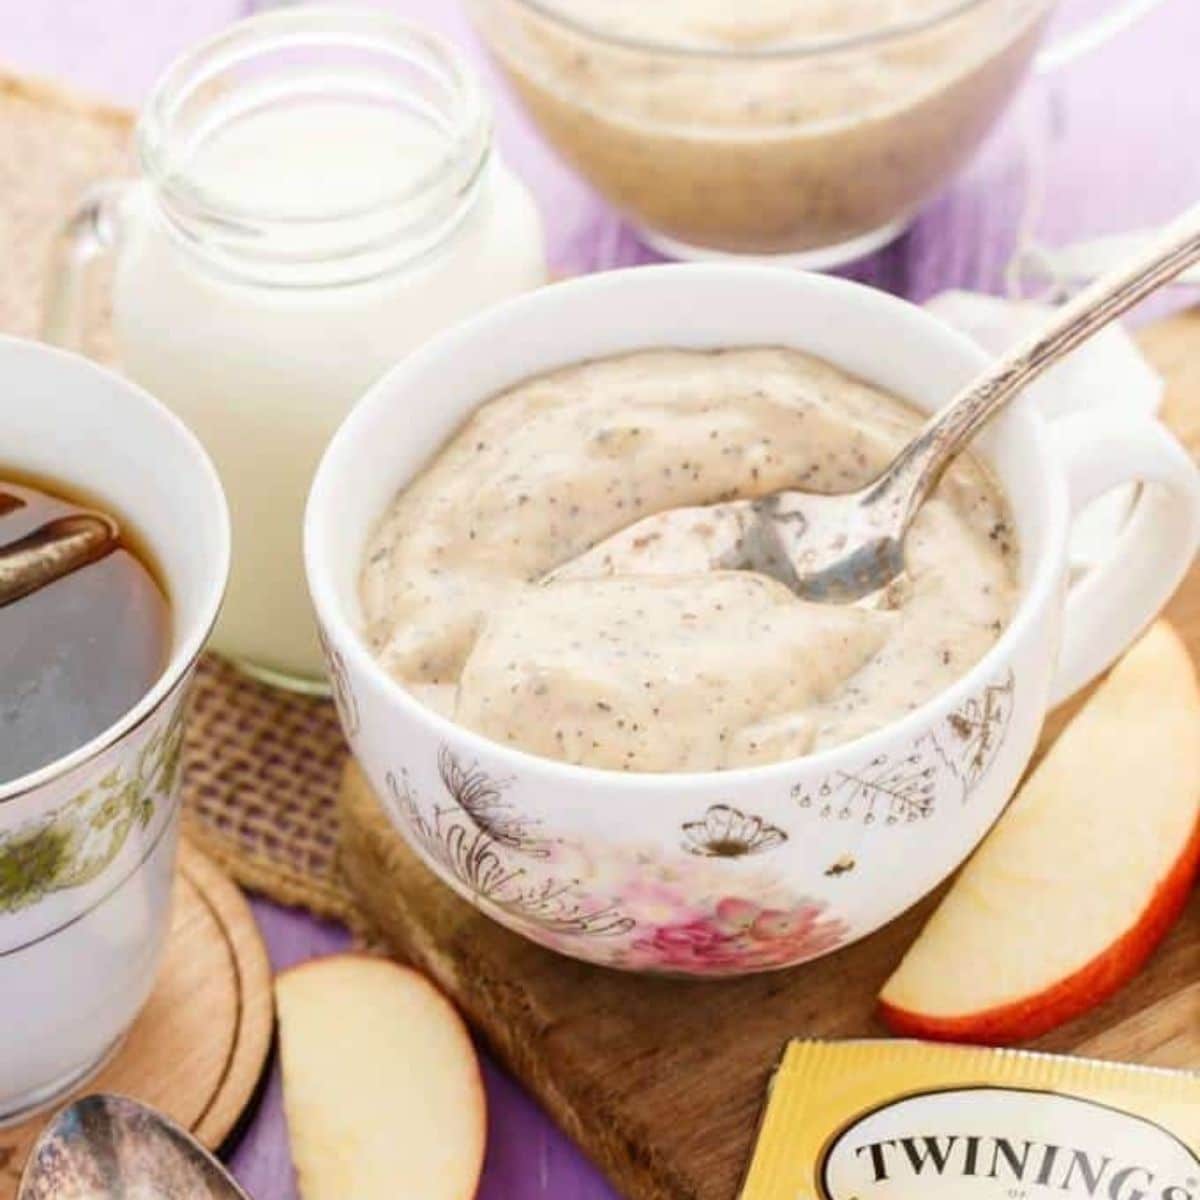 Earl grey pudding on bowl with spoon on wooden pad with slices of apple, cup of tea and jar of milk